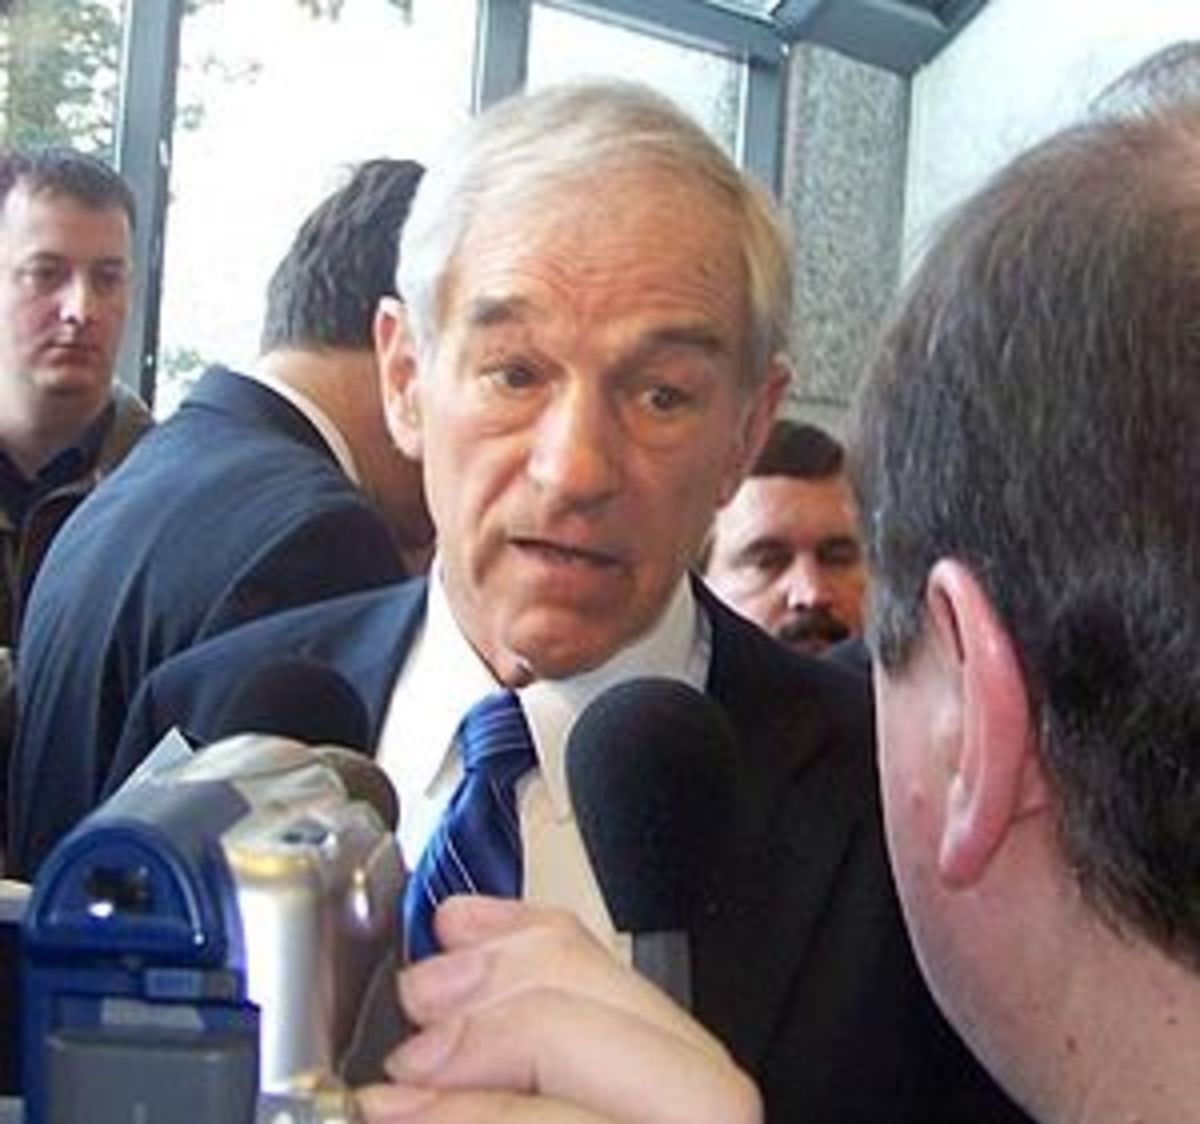 Ron Paul taking questions in Manchester, NH